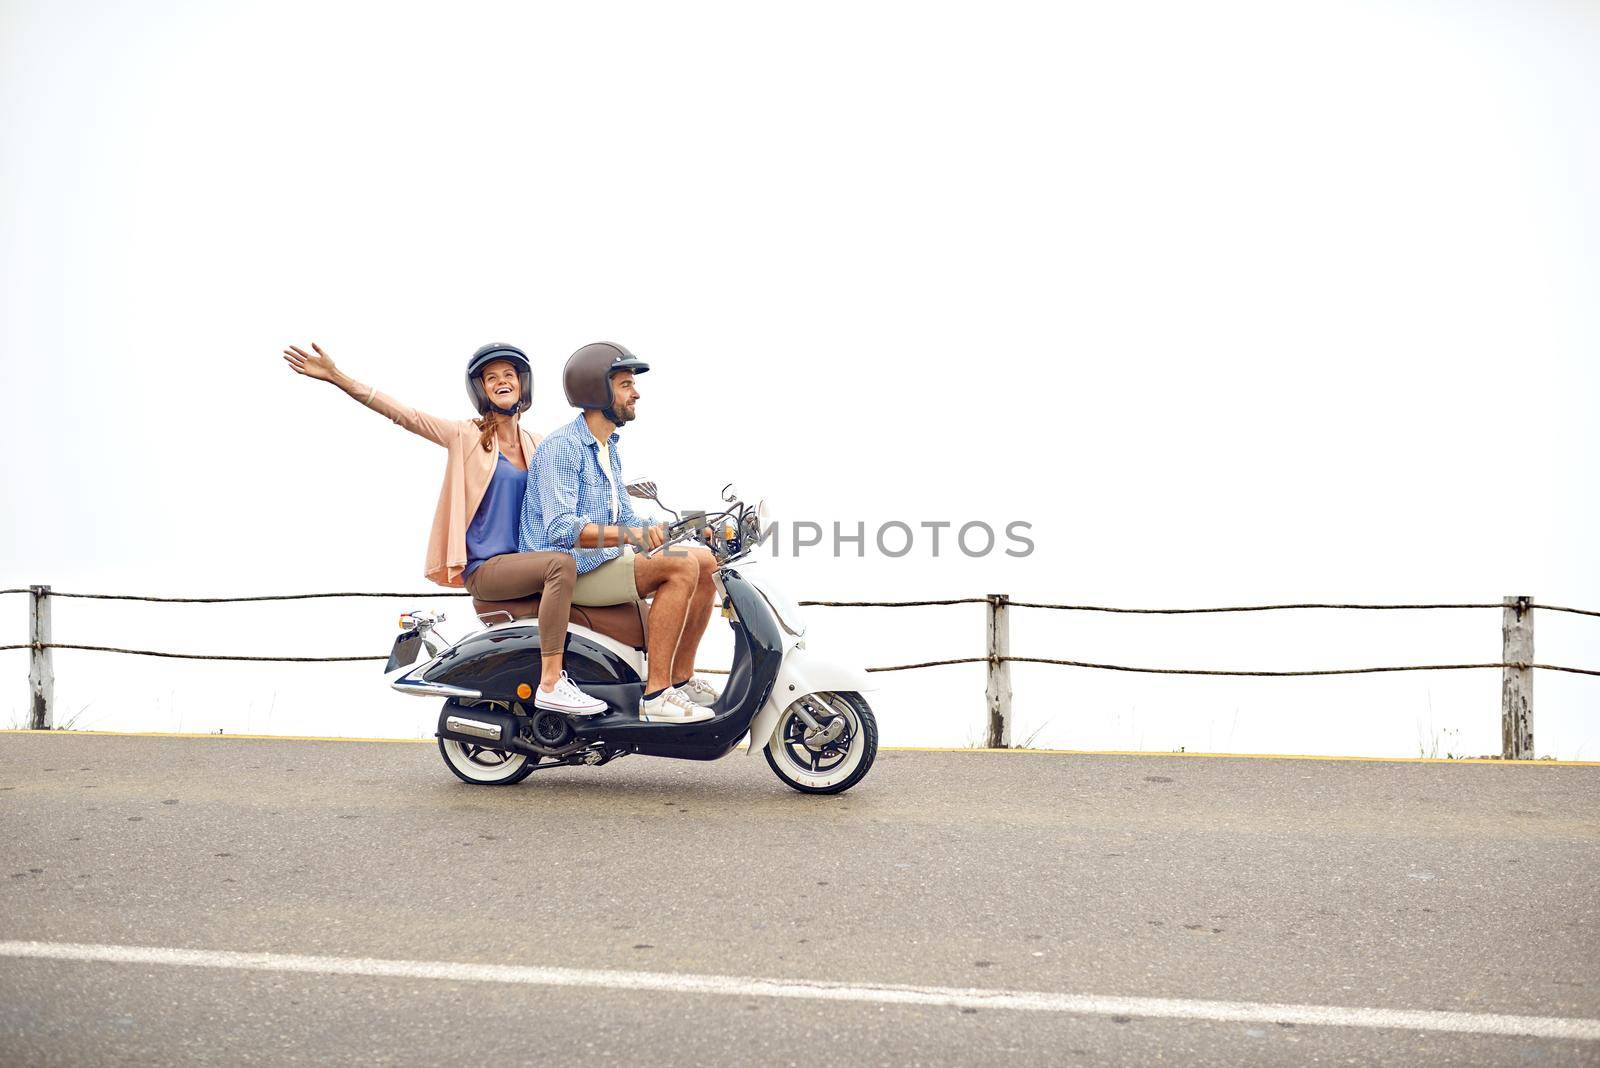 Having a good time on our road trip. Shot of an adventurous couple out for a ride on a motorbike. by YuriArcurs